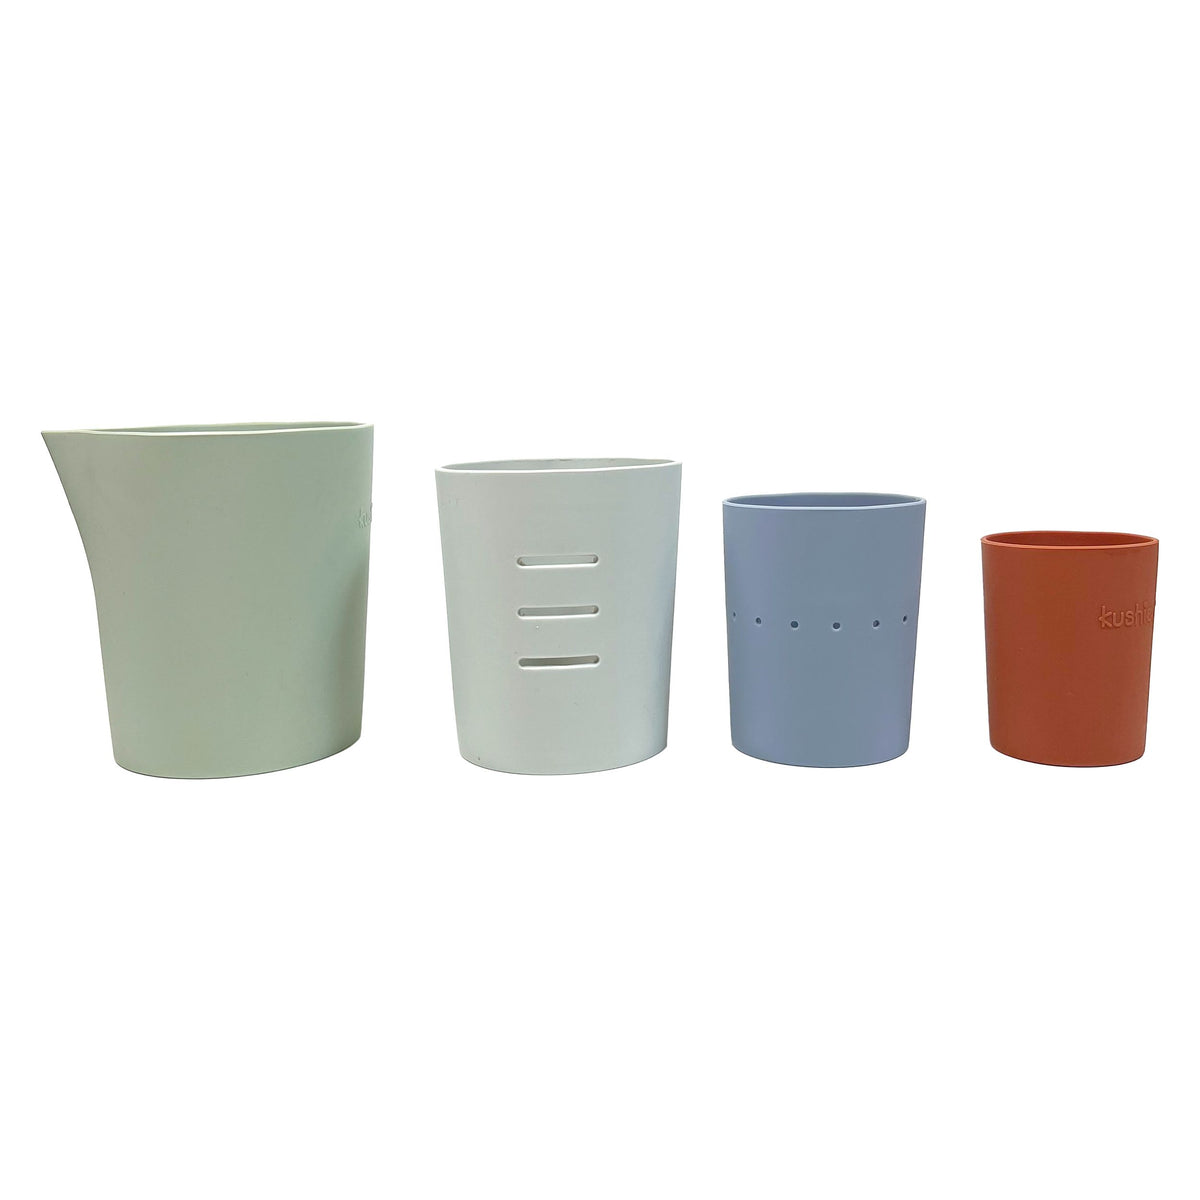 Silistack | Silicone Stacking Cups | Bath Toy Set